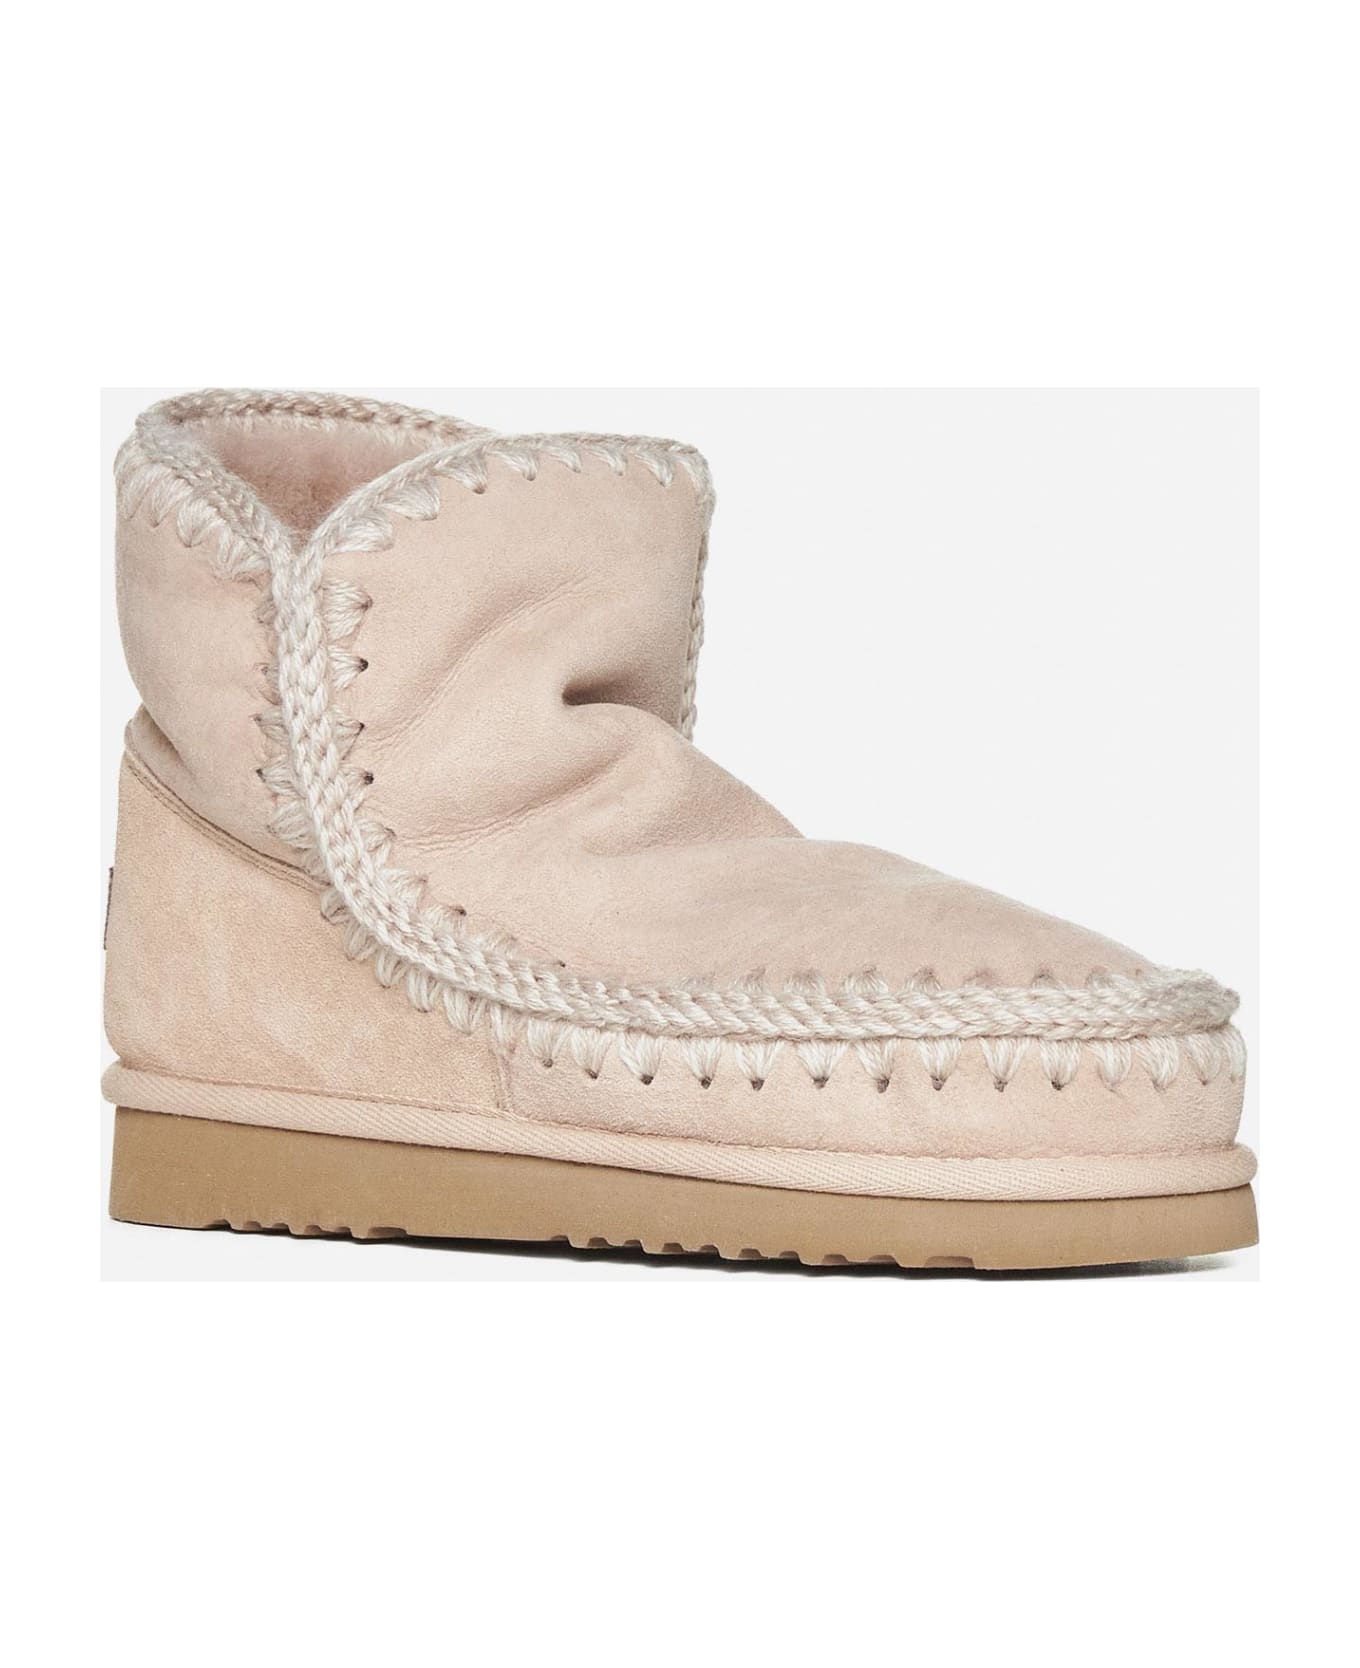 Mou Eskimo Suede And Shearling Ankle Boots